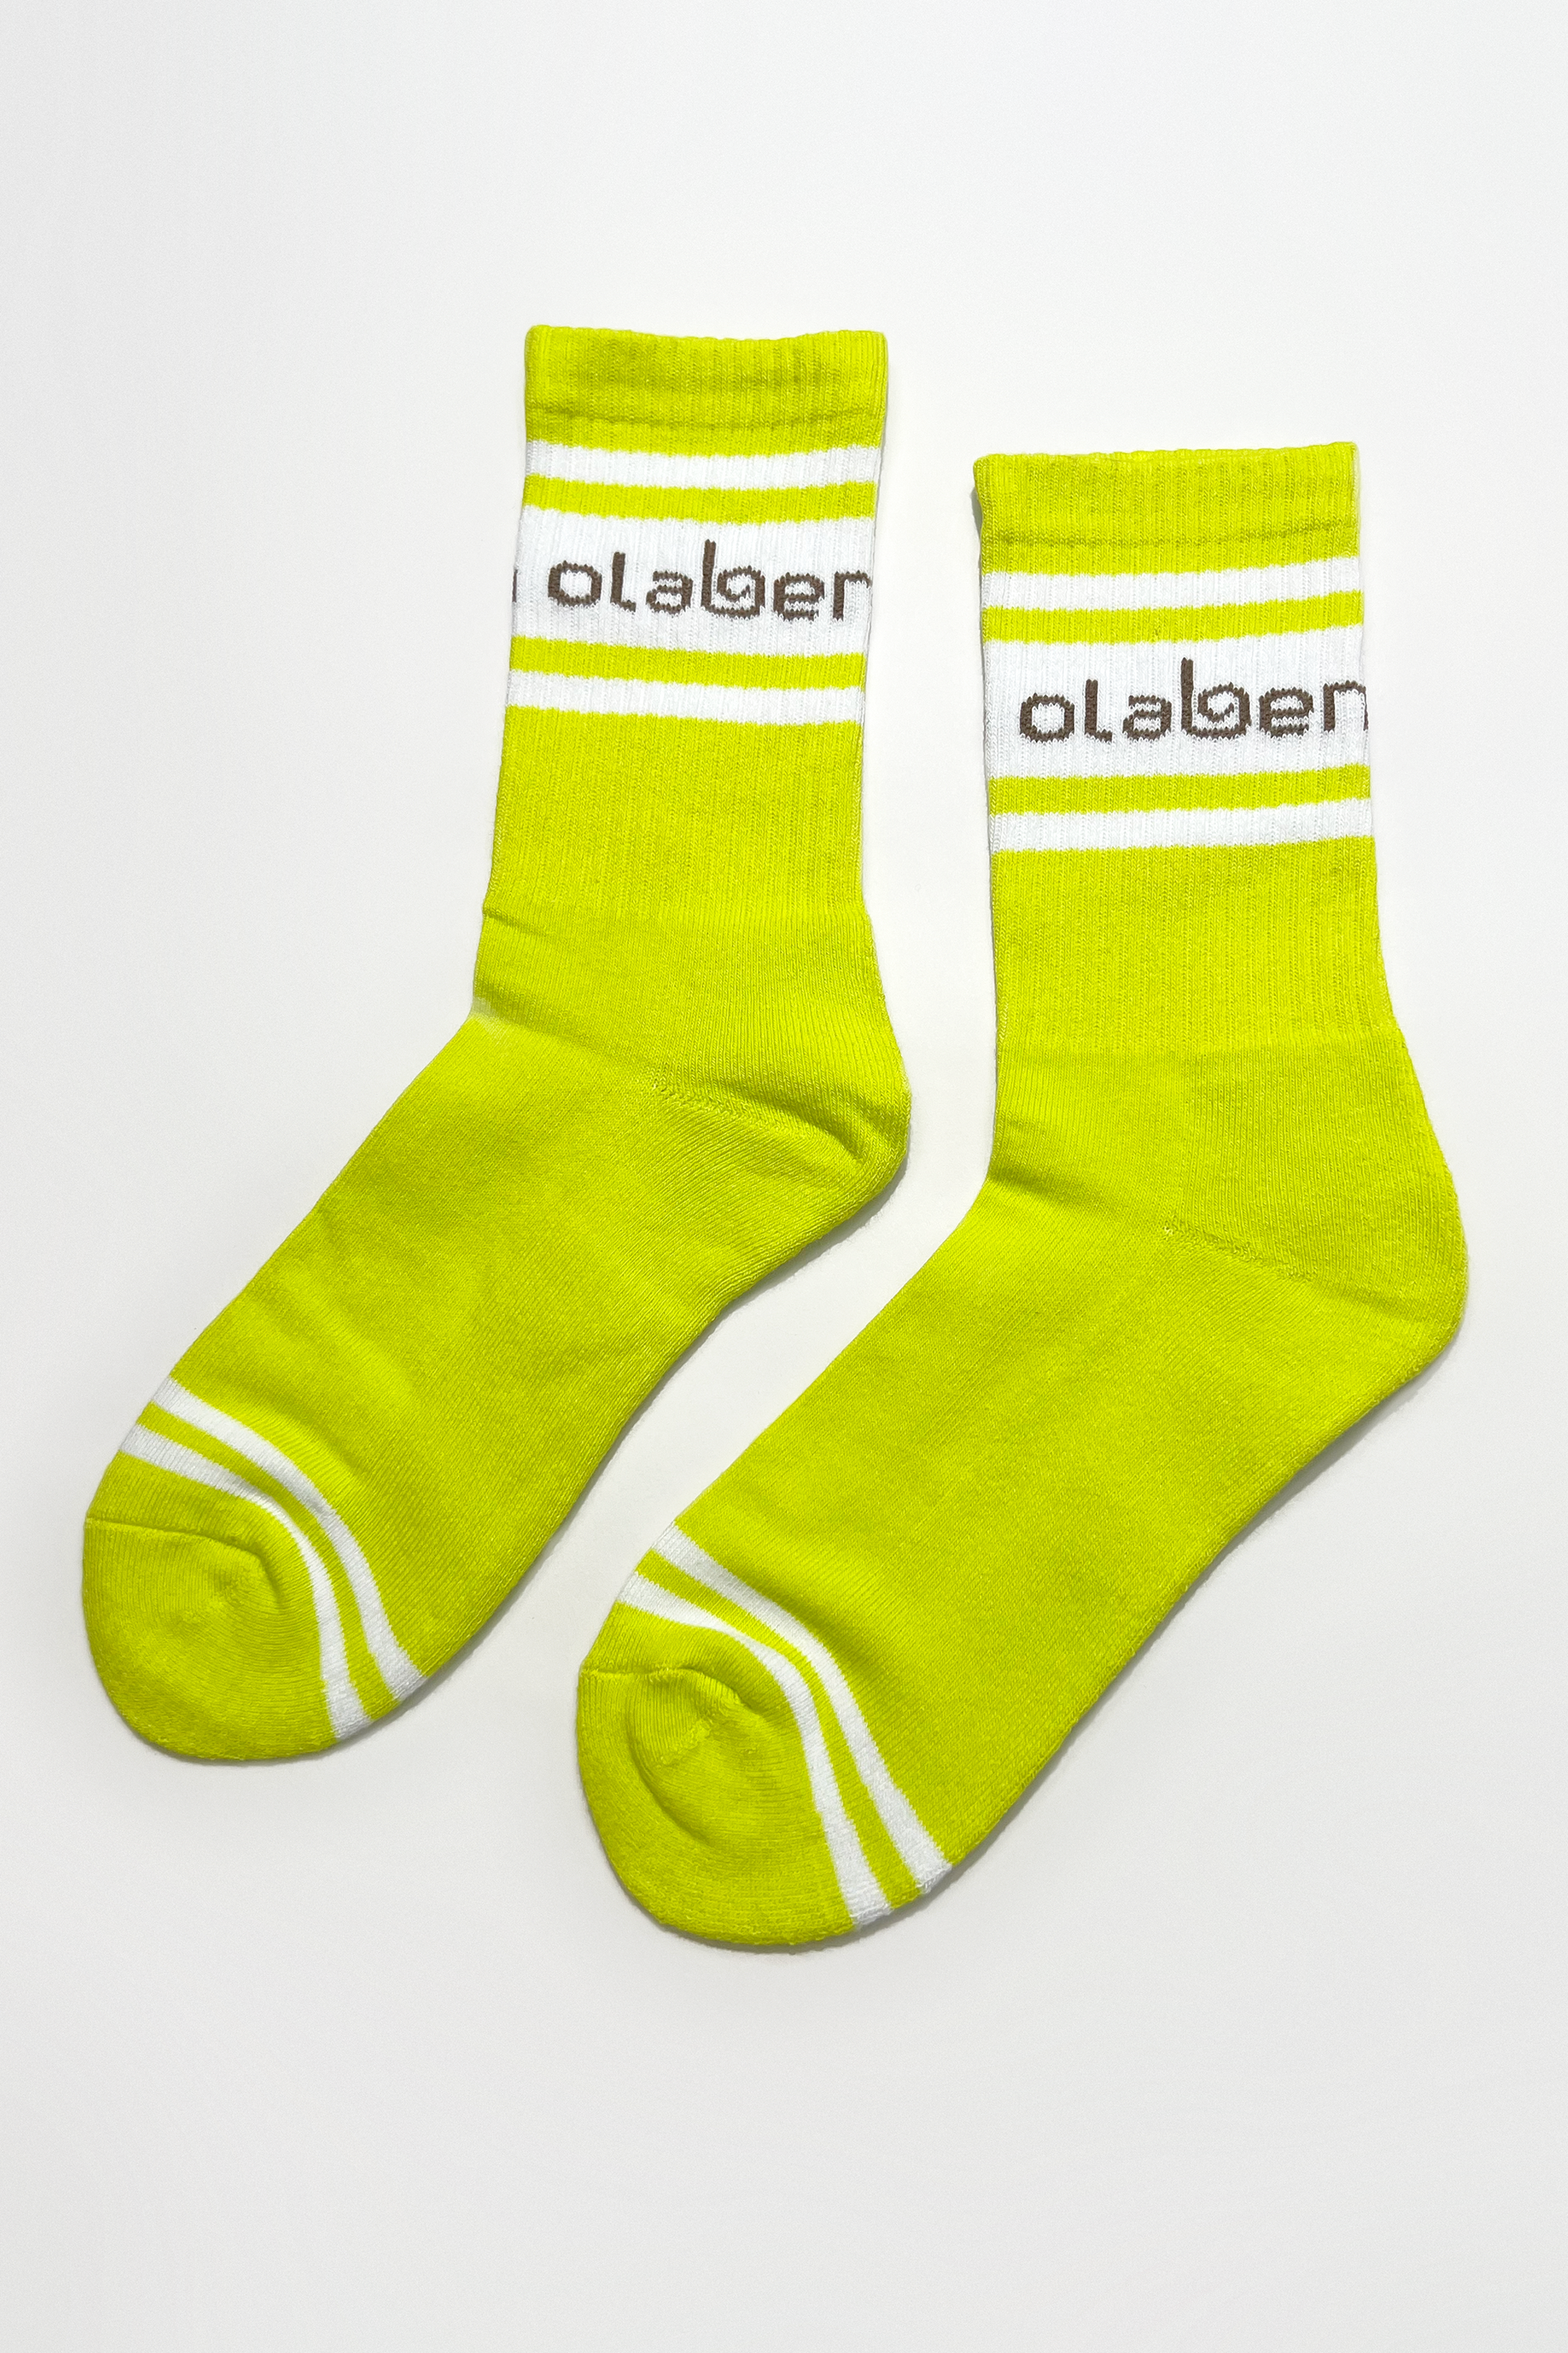 Colorful assortment of socks and lemon tonic on a yellow background - OW-0151-USO-YL_2.png